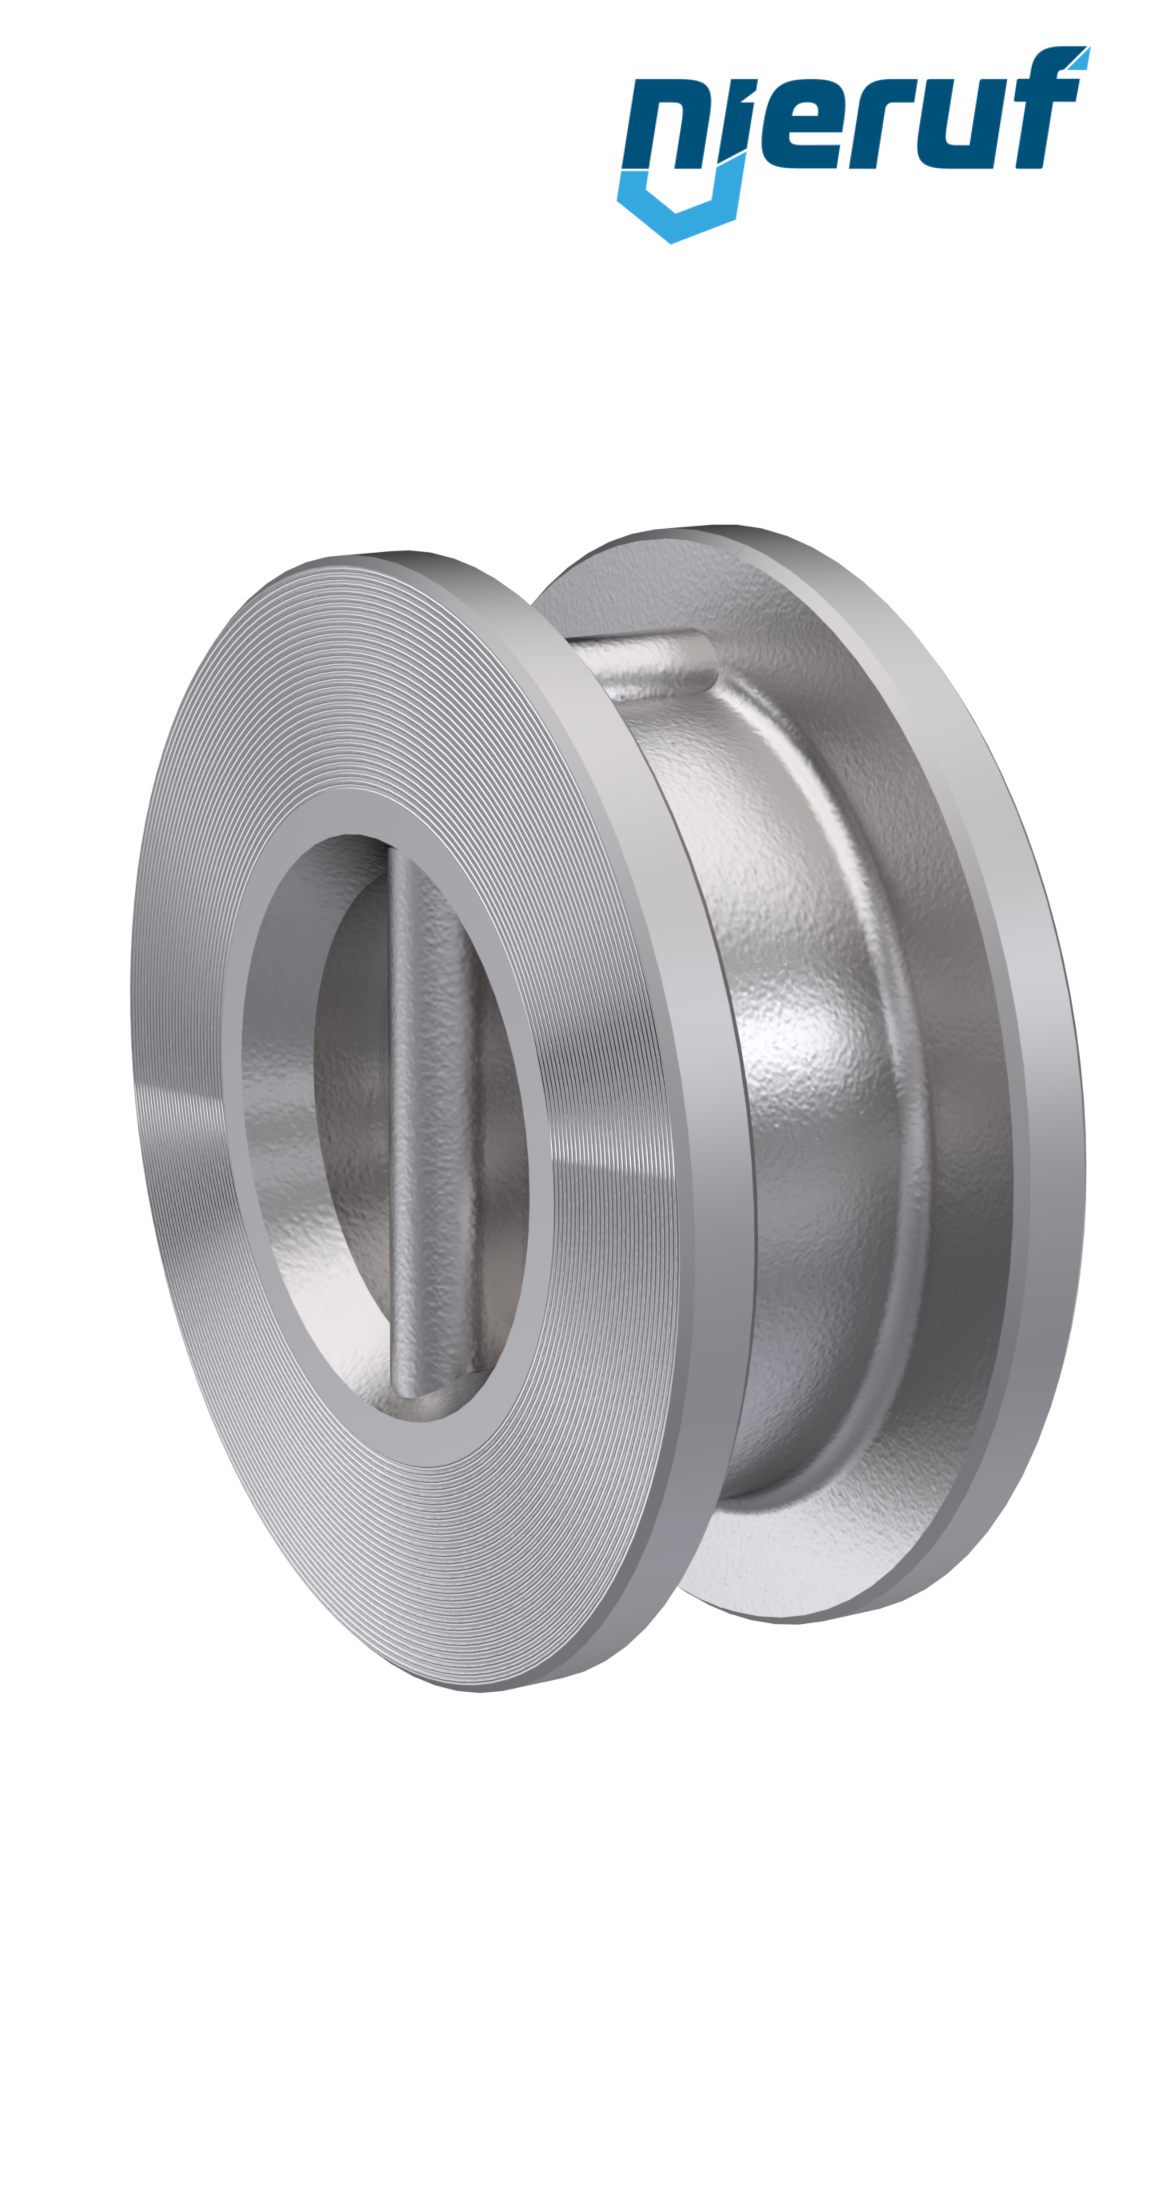 dual plate check valve DN125 DR03 stainless steel 1.4408 metal